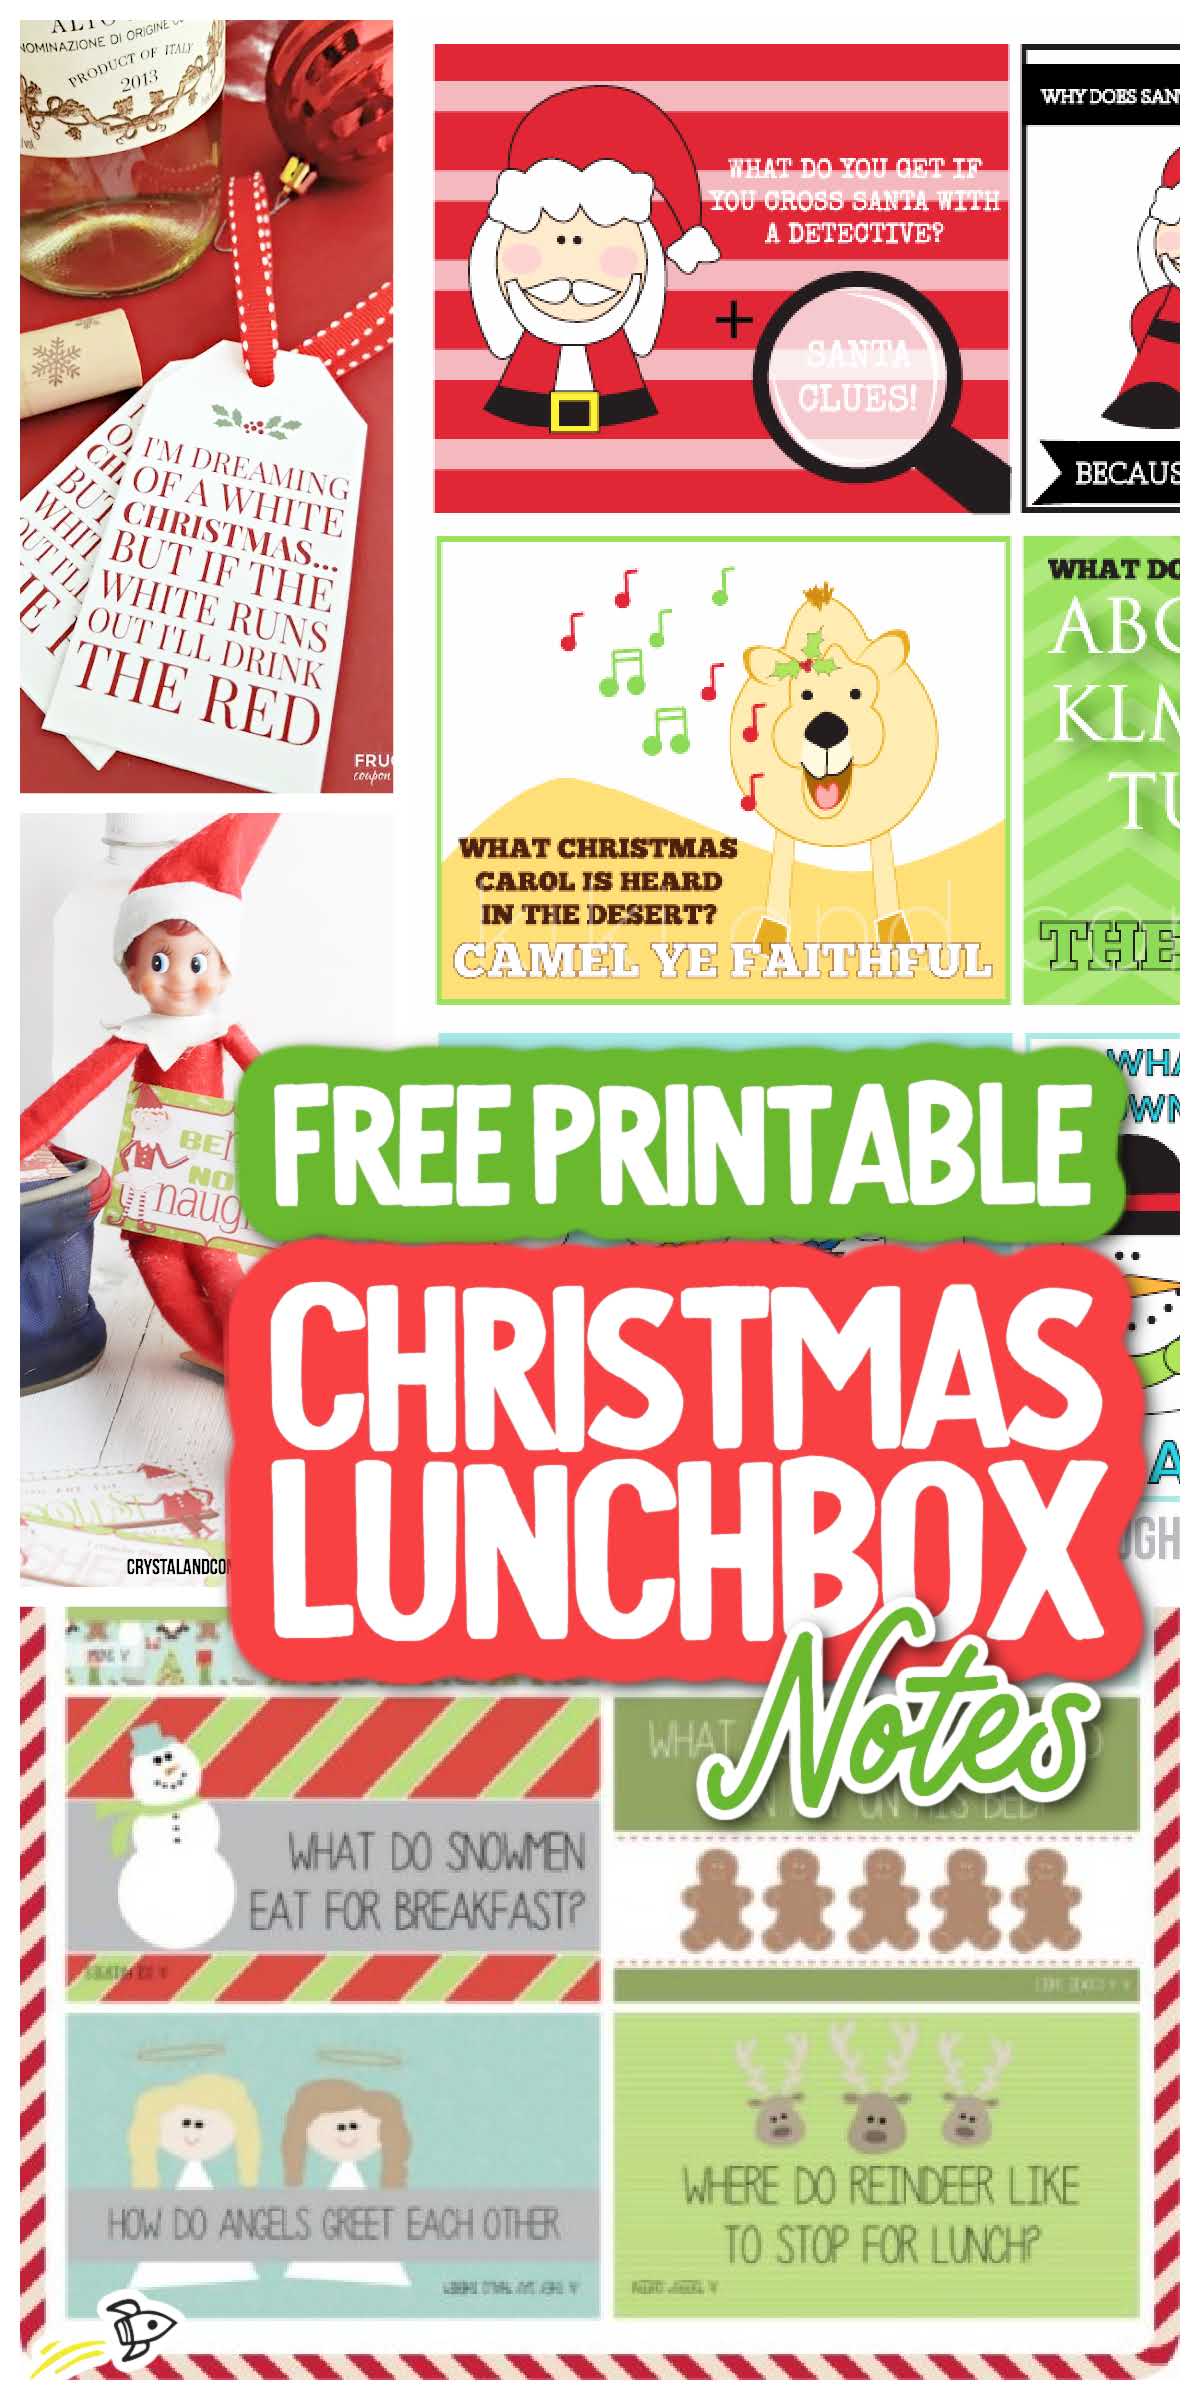 7 Free Printable Christmas Lunchbox Notes - Spaceships and Laser Beams